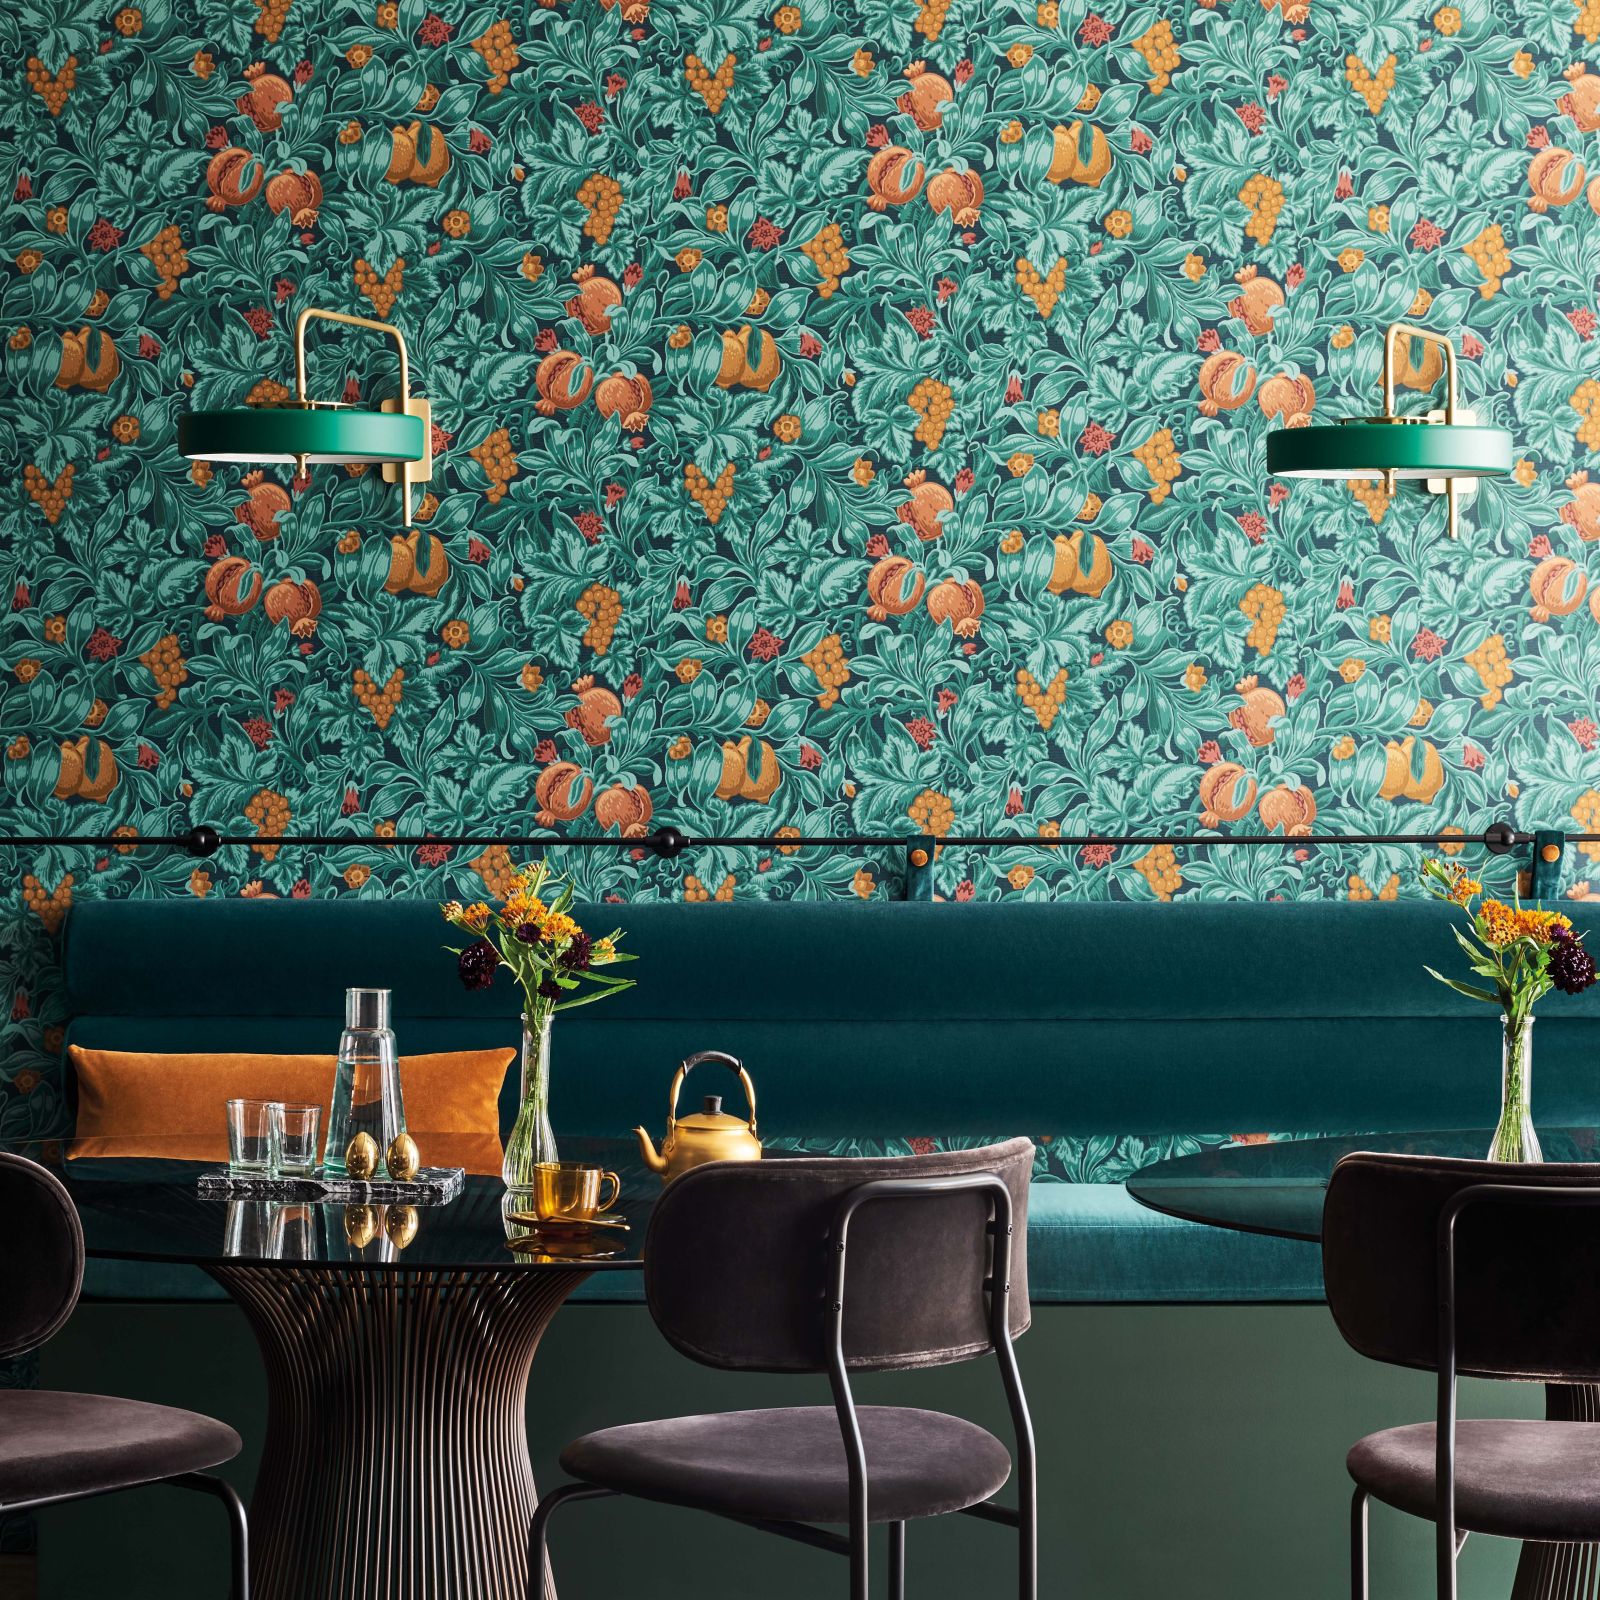 Vines of Pomona wallpaper in a choice of 4 colourways